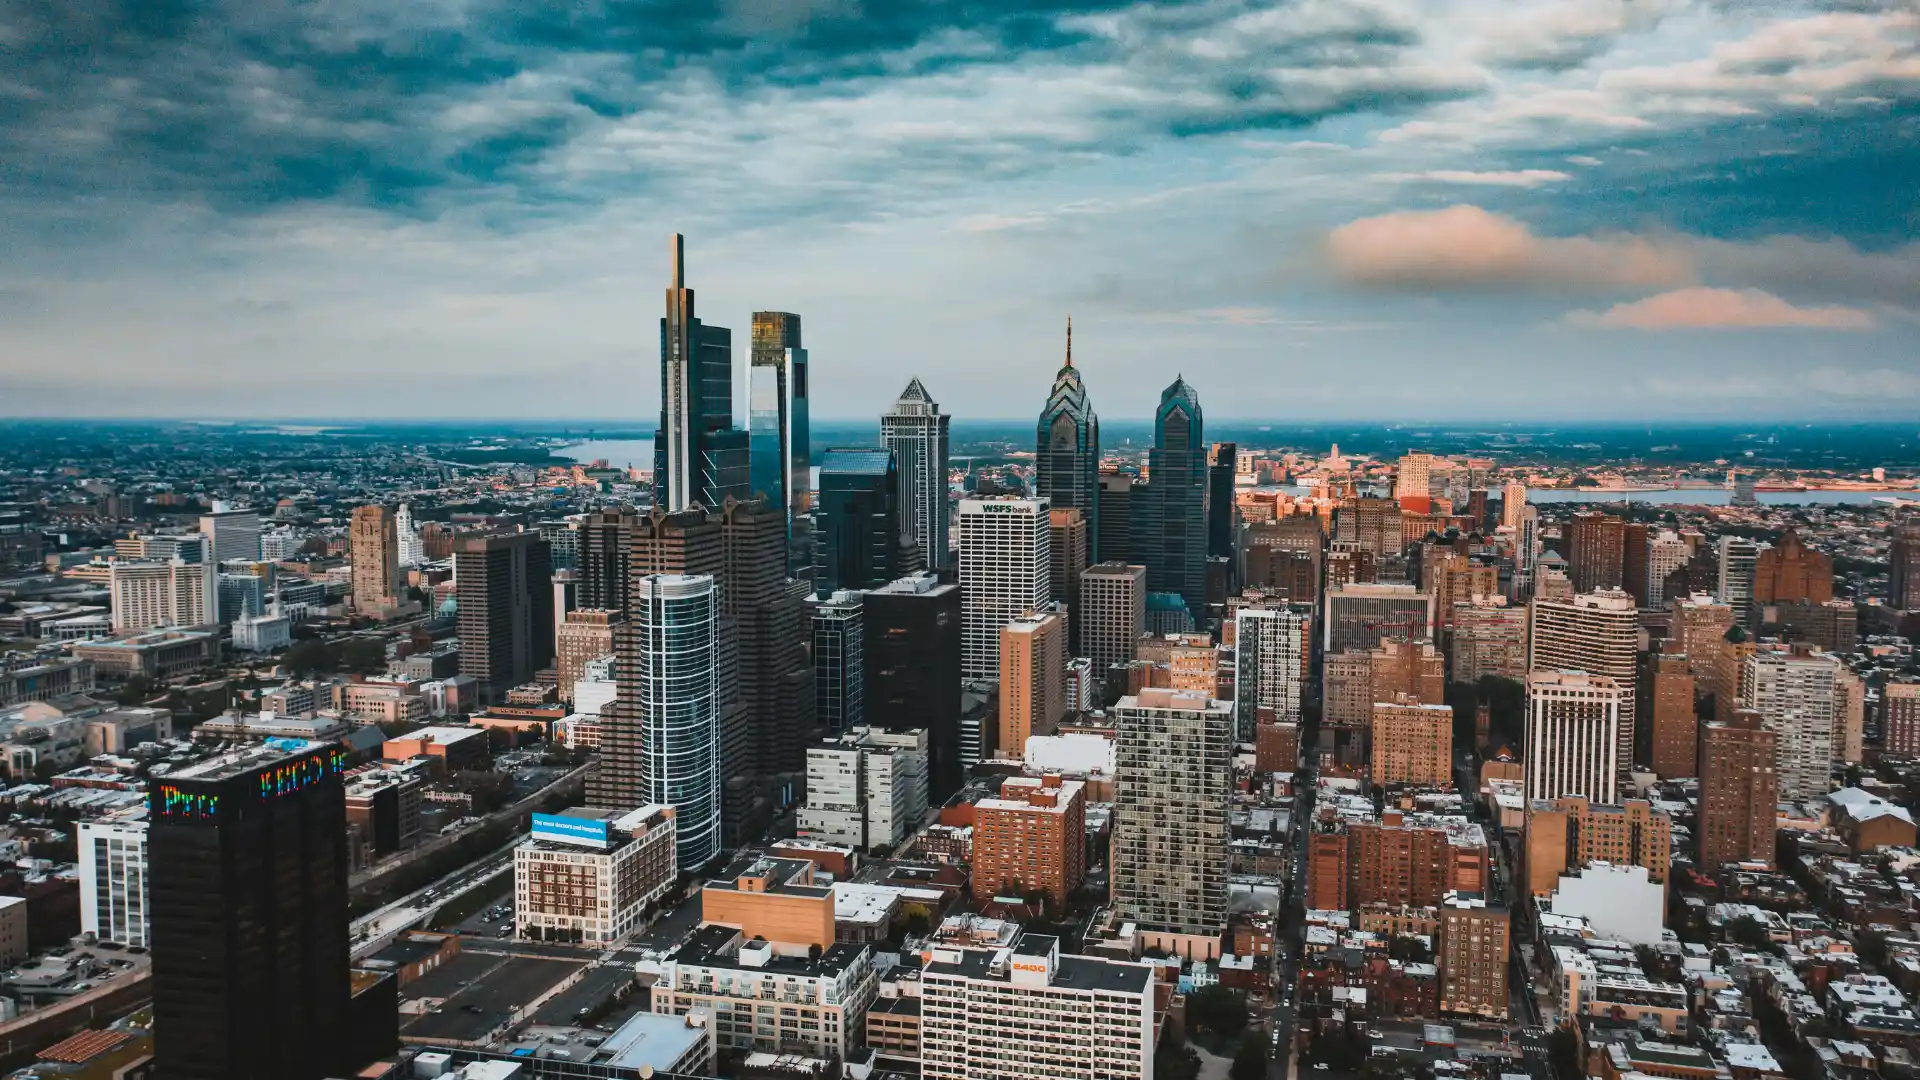 Photo from high above Philadelphia looking down